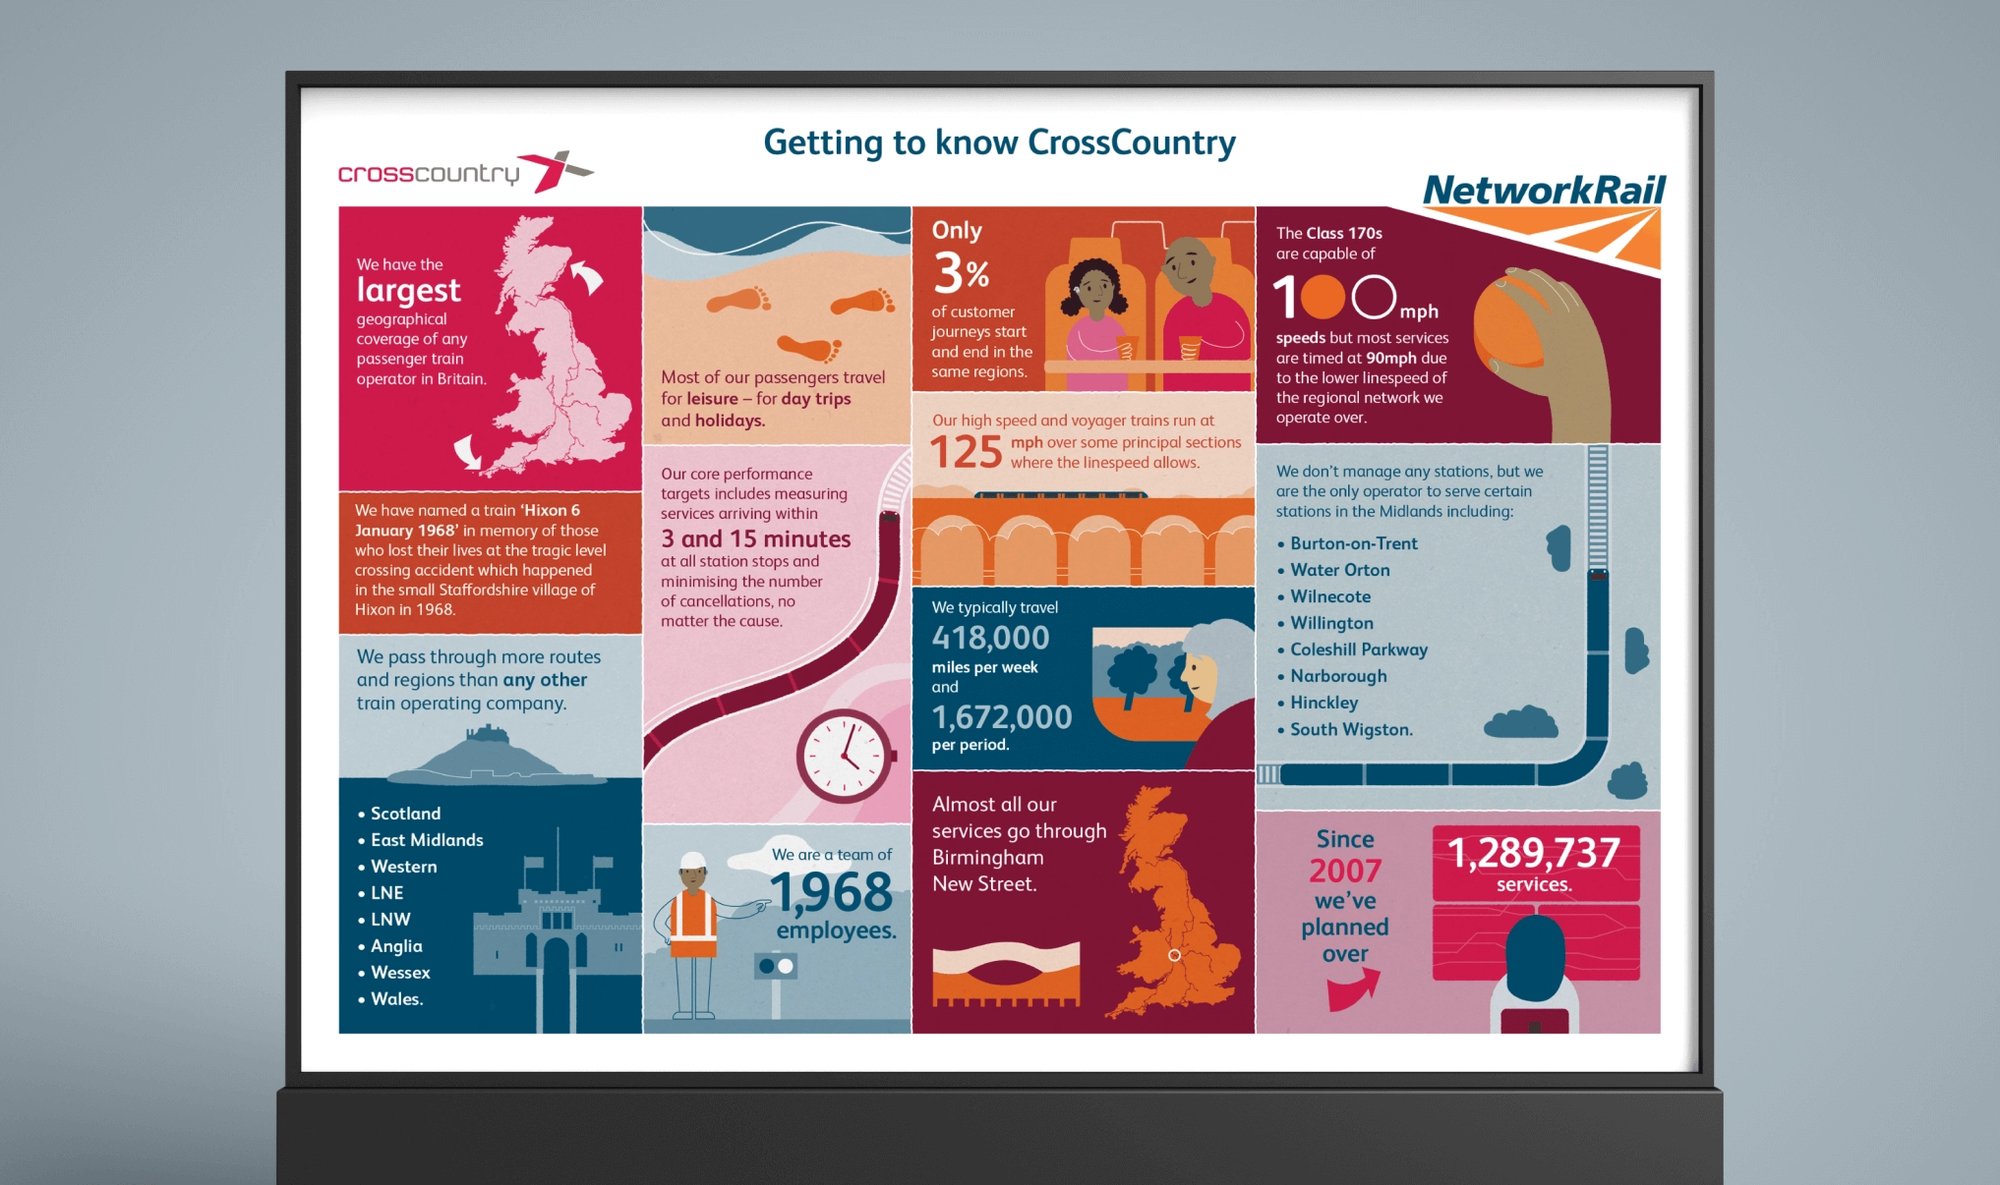 The 'getting to know crosscountry' infographic we designed.